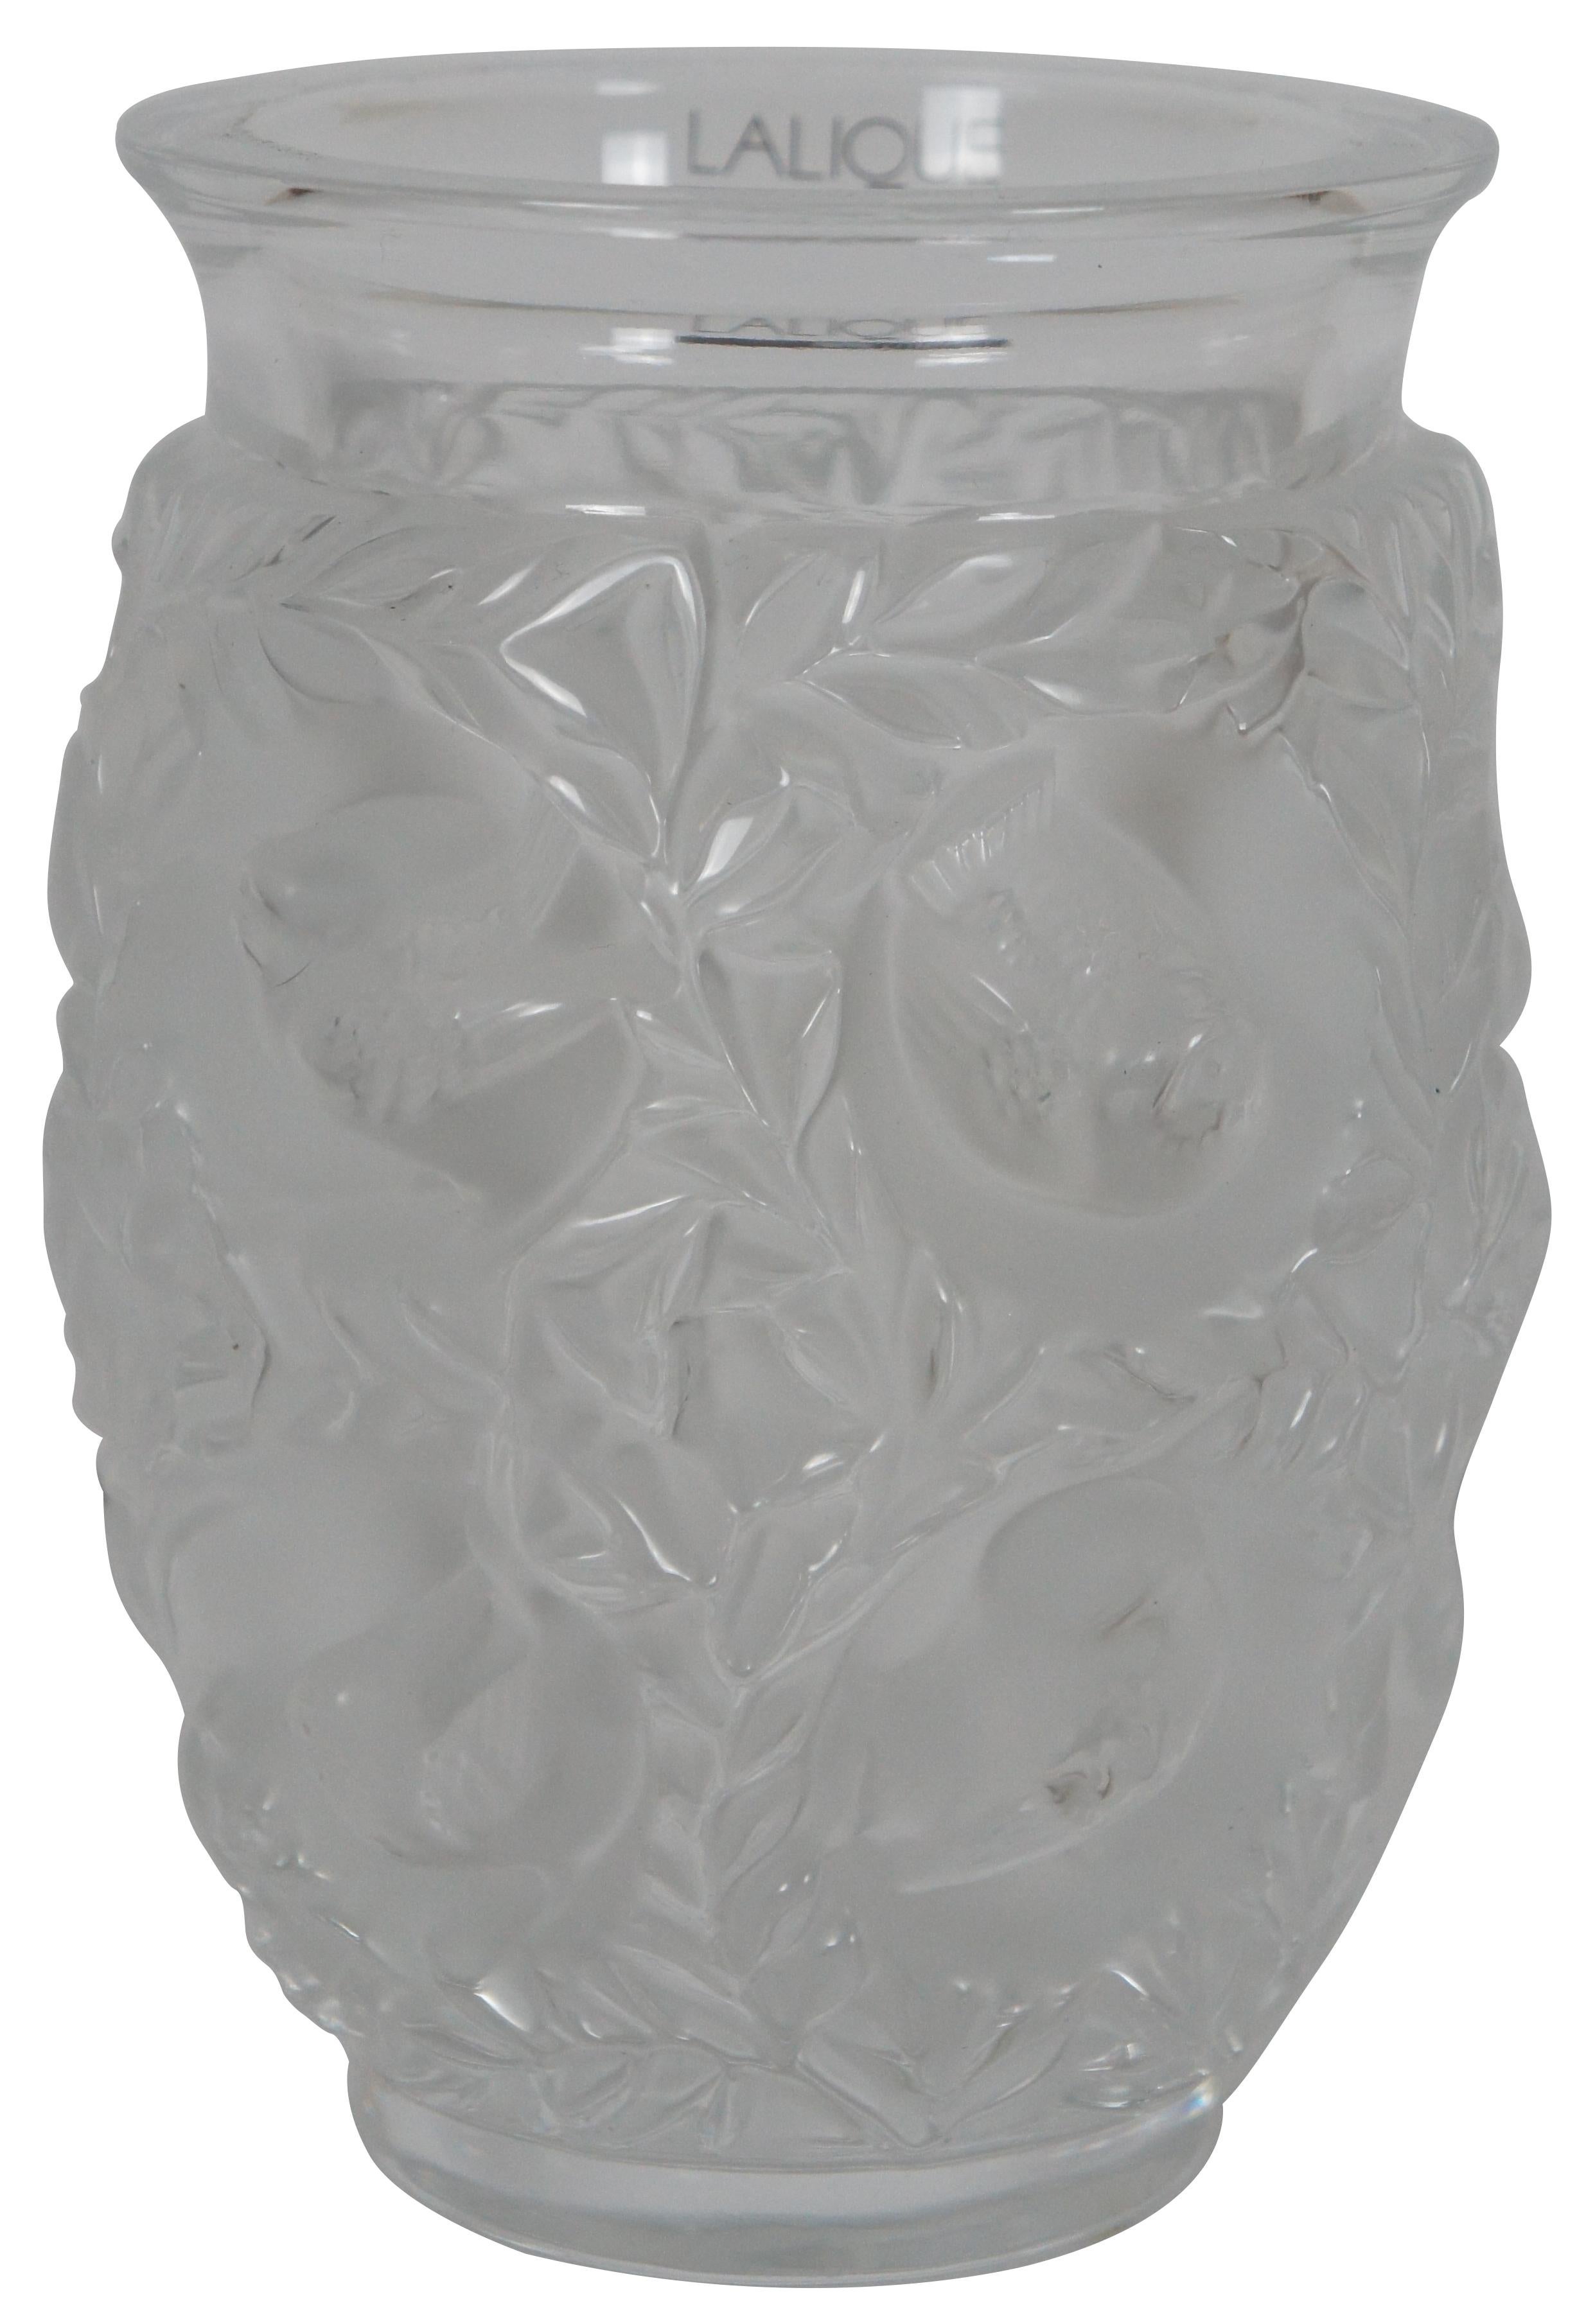 French Provincial Vintage Lalique France Bagatelle Frosted Crystal Love Birds in Foliage Vase 7